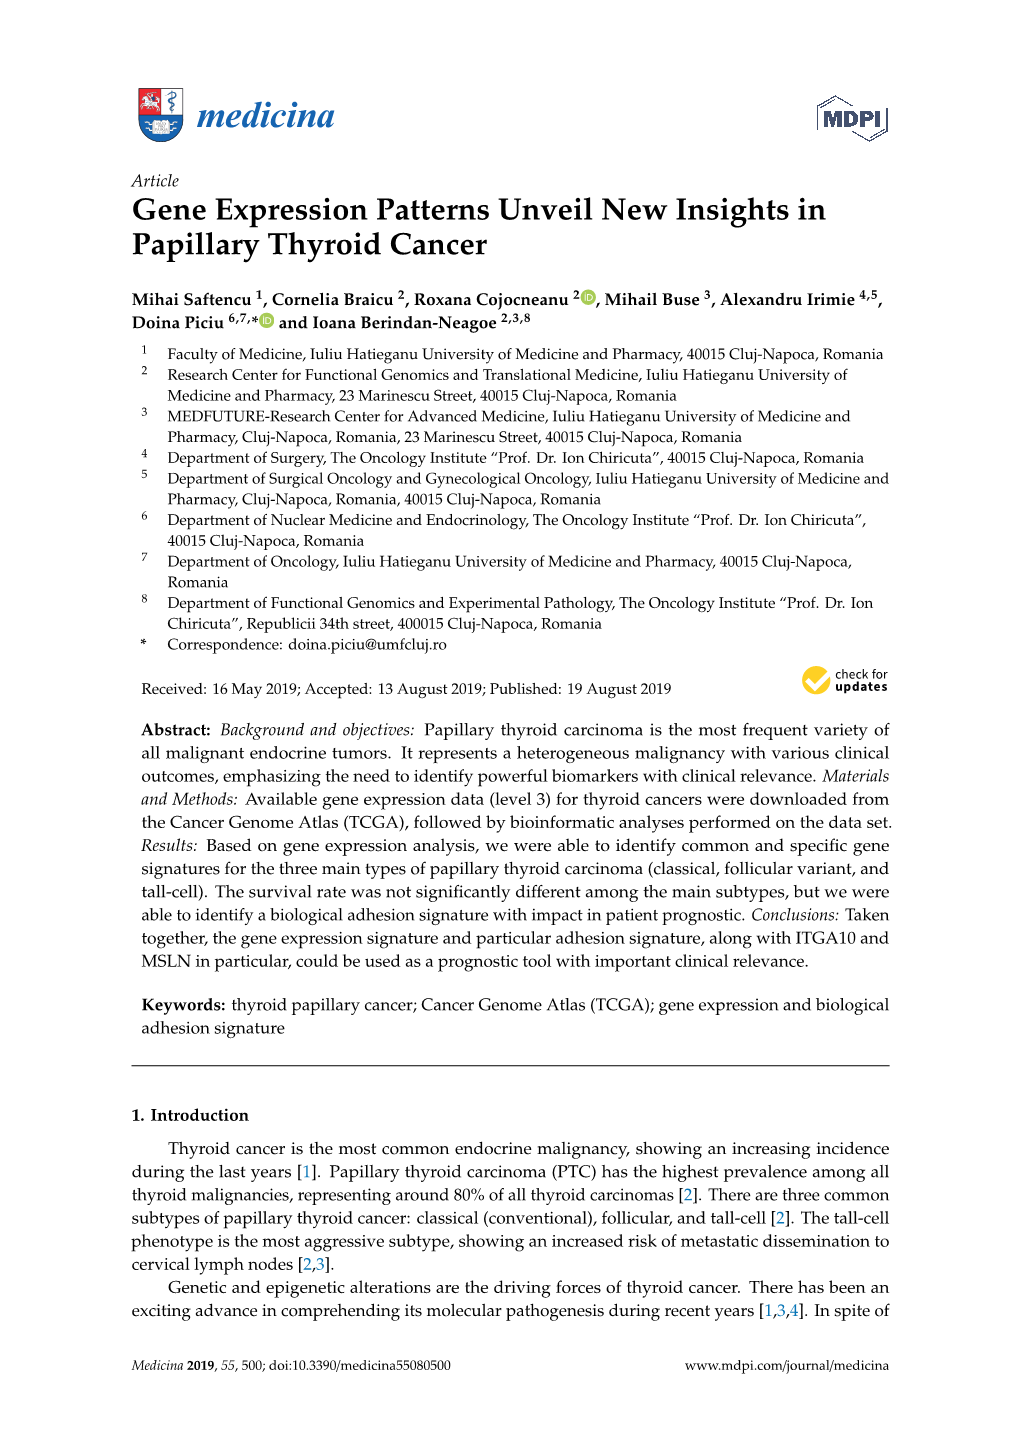 Gene Expression Patterns Unveil New Insights in Papillary Thyroid Cancer